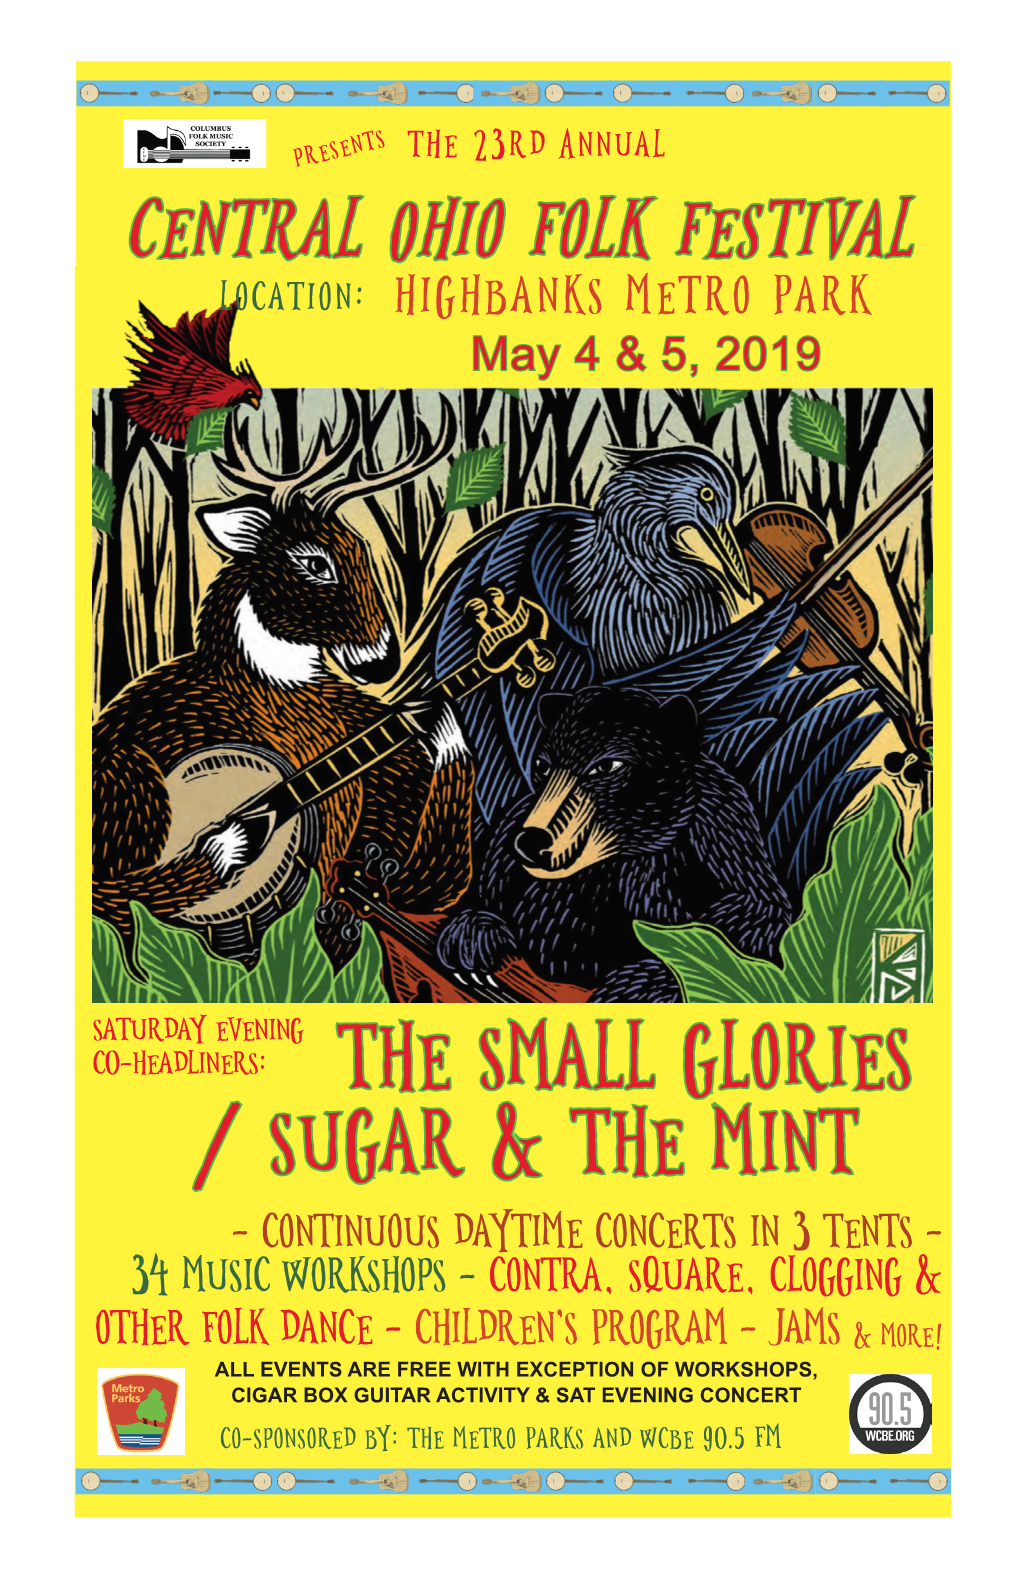 The Small Glories / Sugar & the Mint